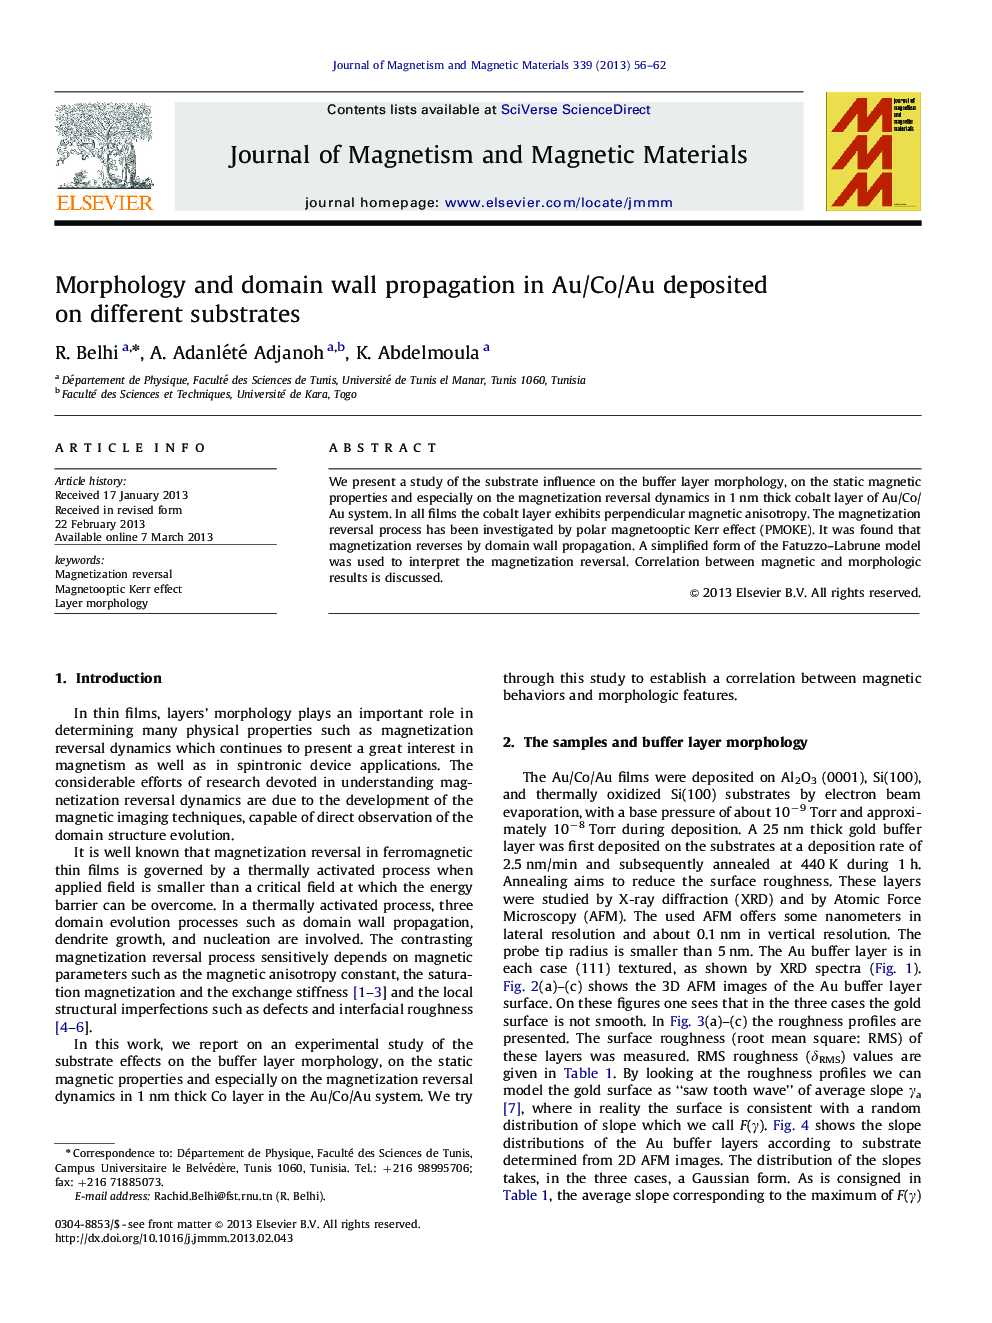 Morphology and domain wall propagation in Au/Co/Au deposited on different substrates